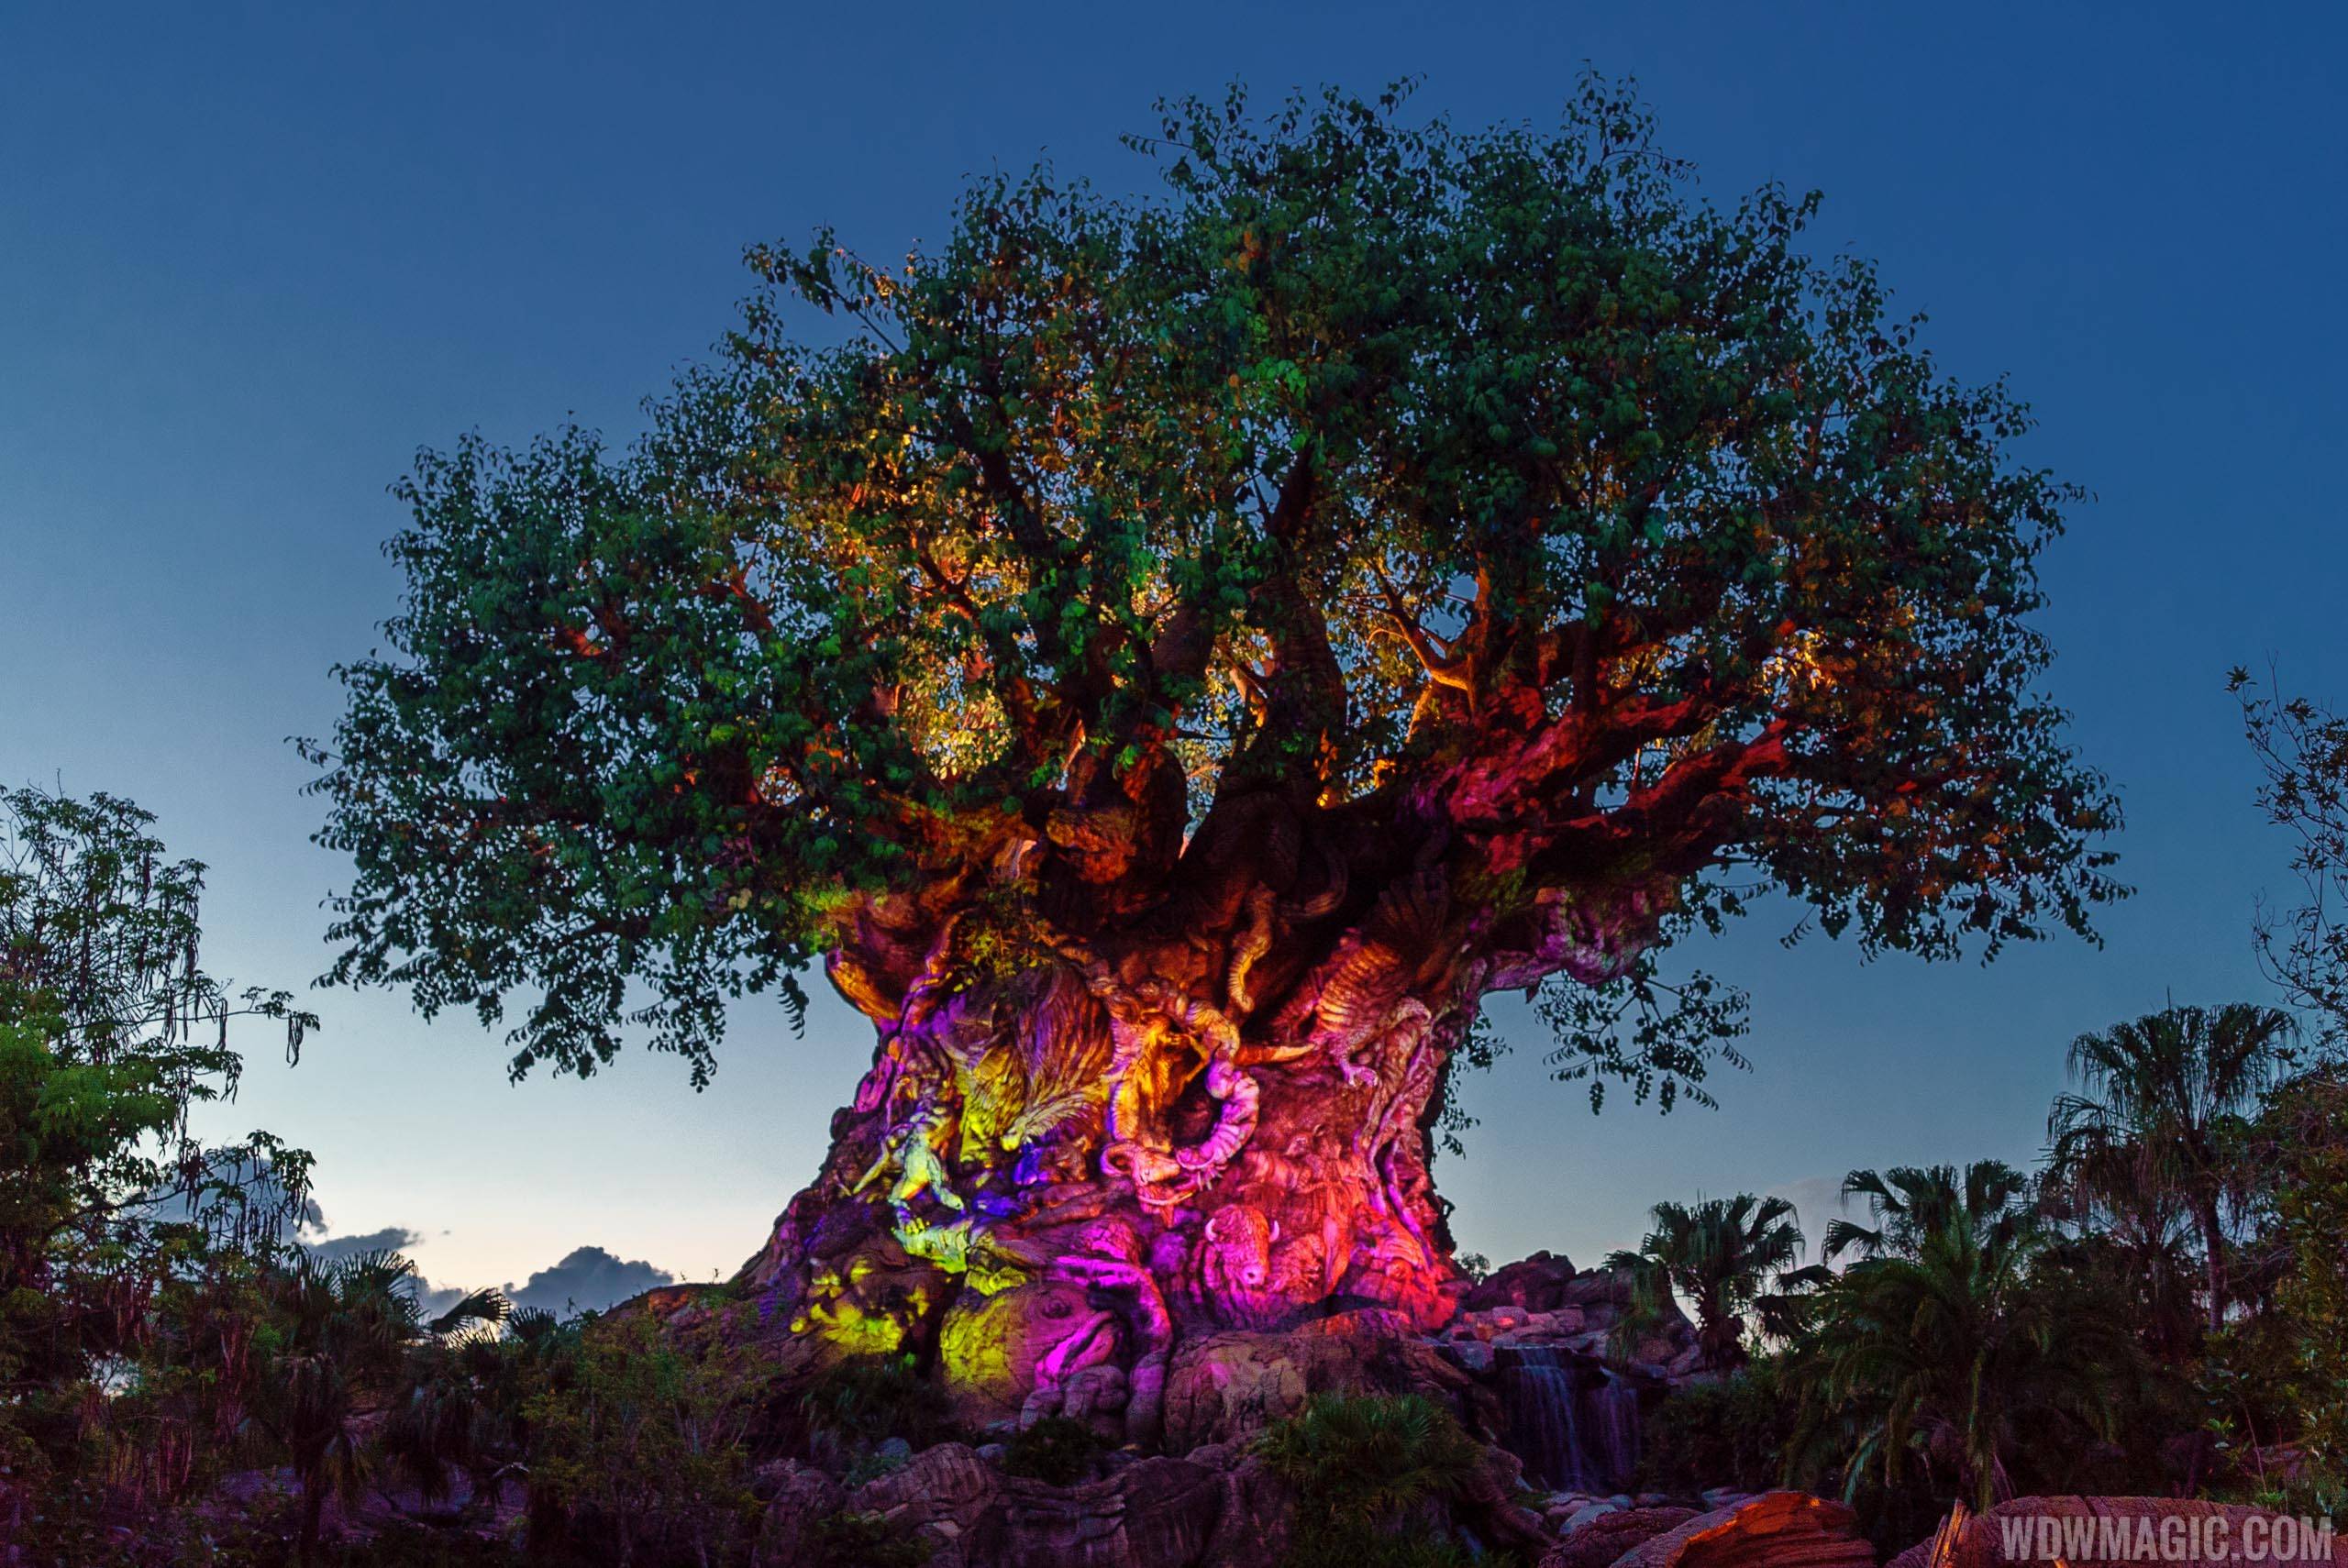 VIDEO - New Awakenings come to the Tree of Life for the holidays